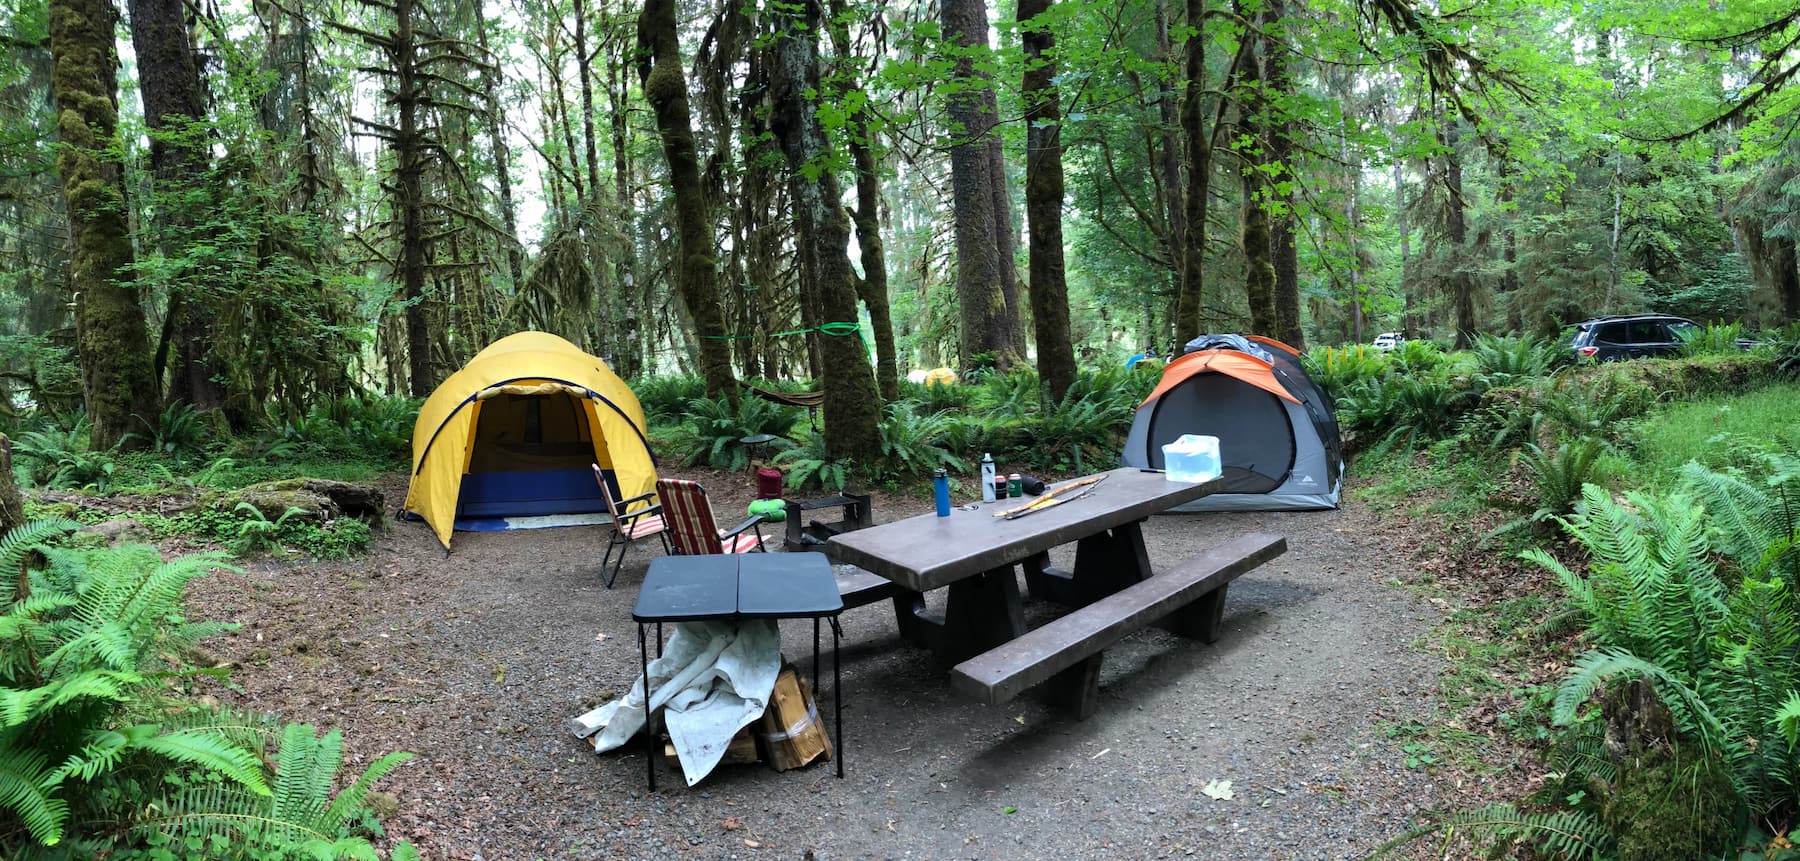 Two tents pitched beside a picnic table in a lush pacific northwest forest covered in moss and ferns in the Hoh National Rainforest.